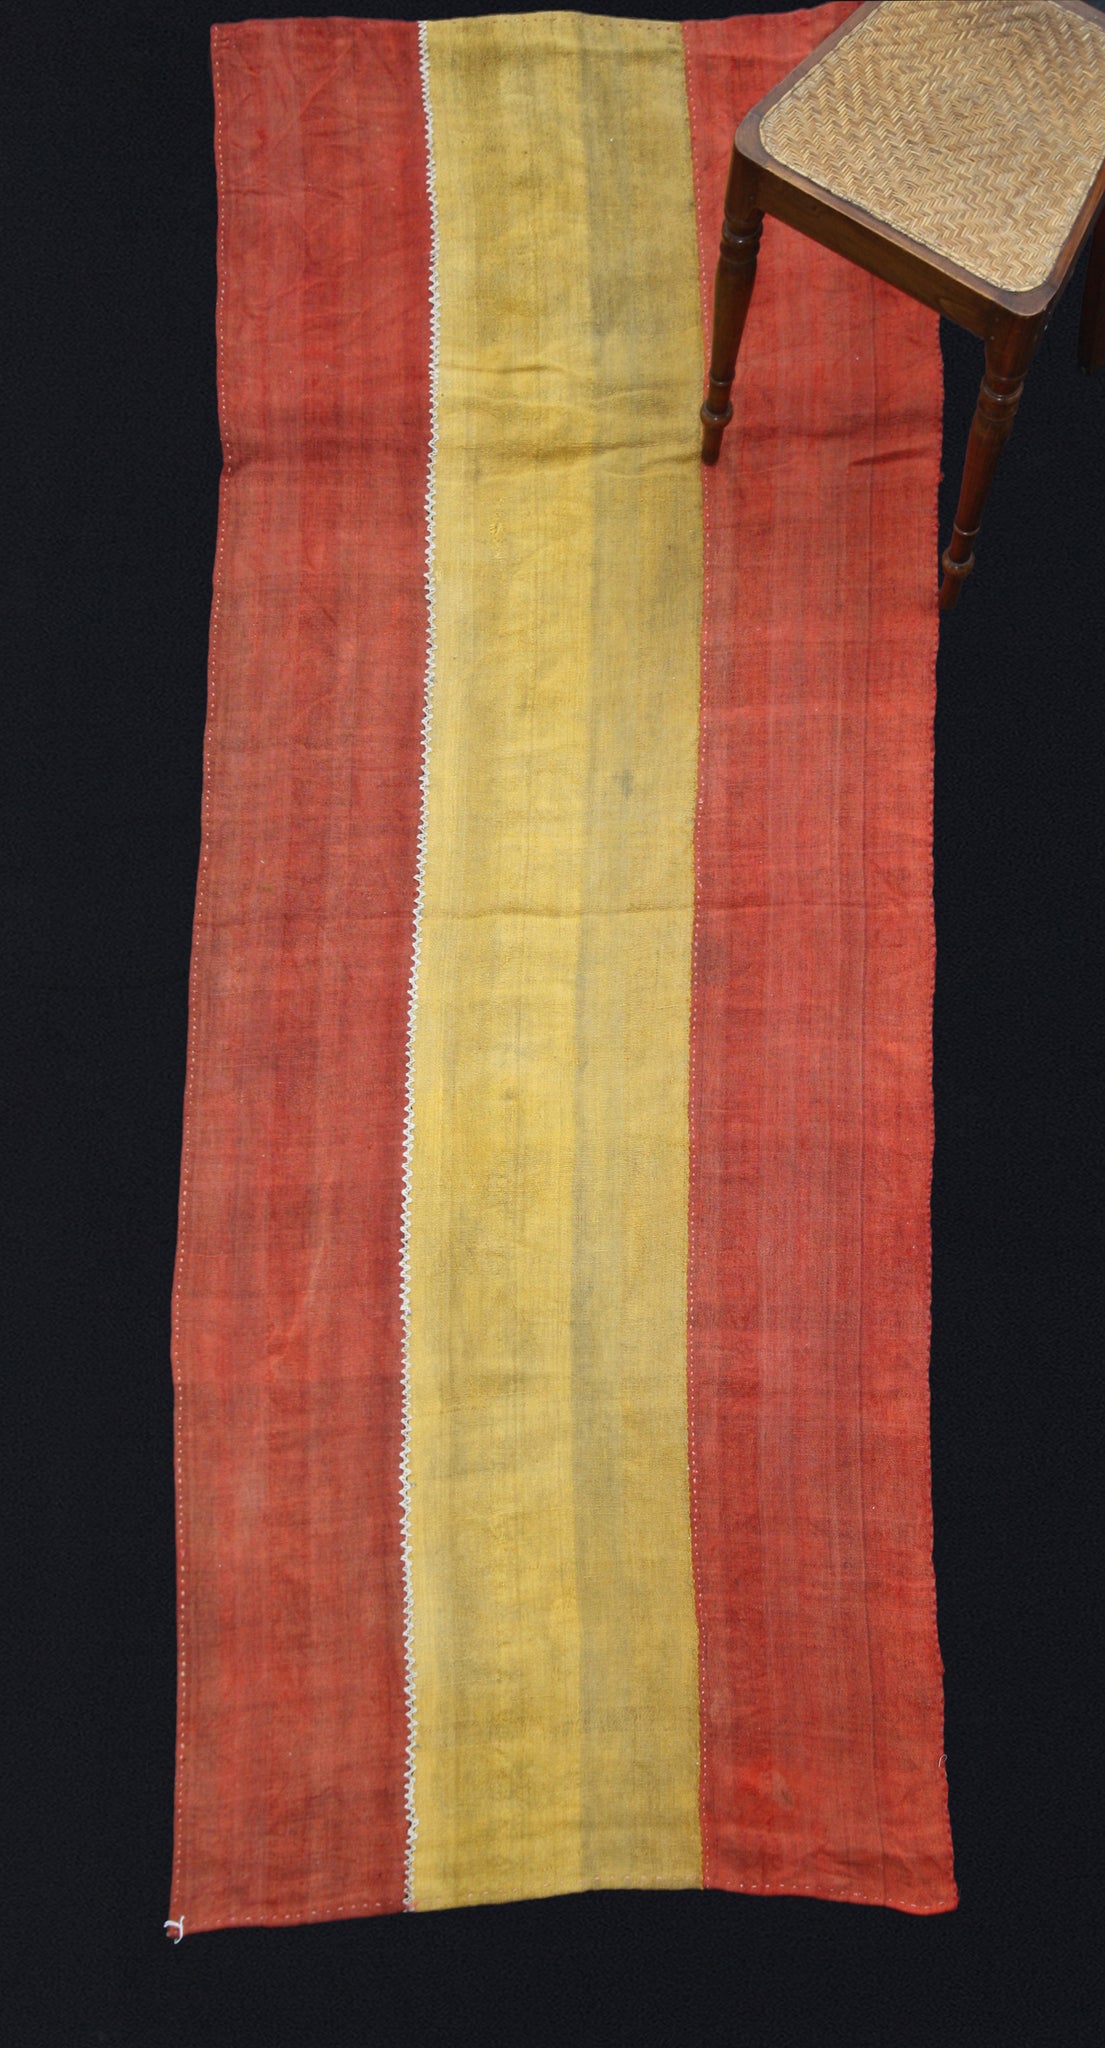 3-Band Paturge Naumal Perde-Red With Pale Olive Green Center (3' 2.5" x 9' 2")